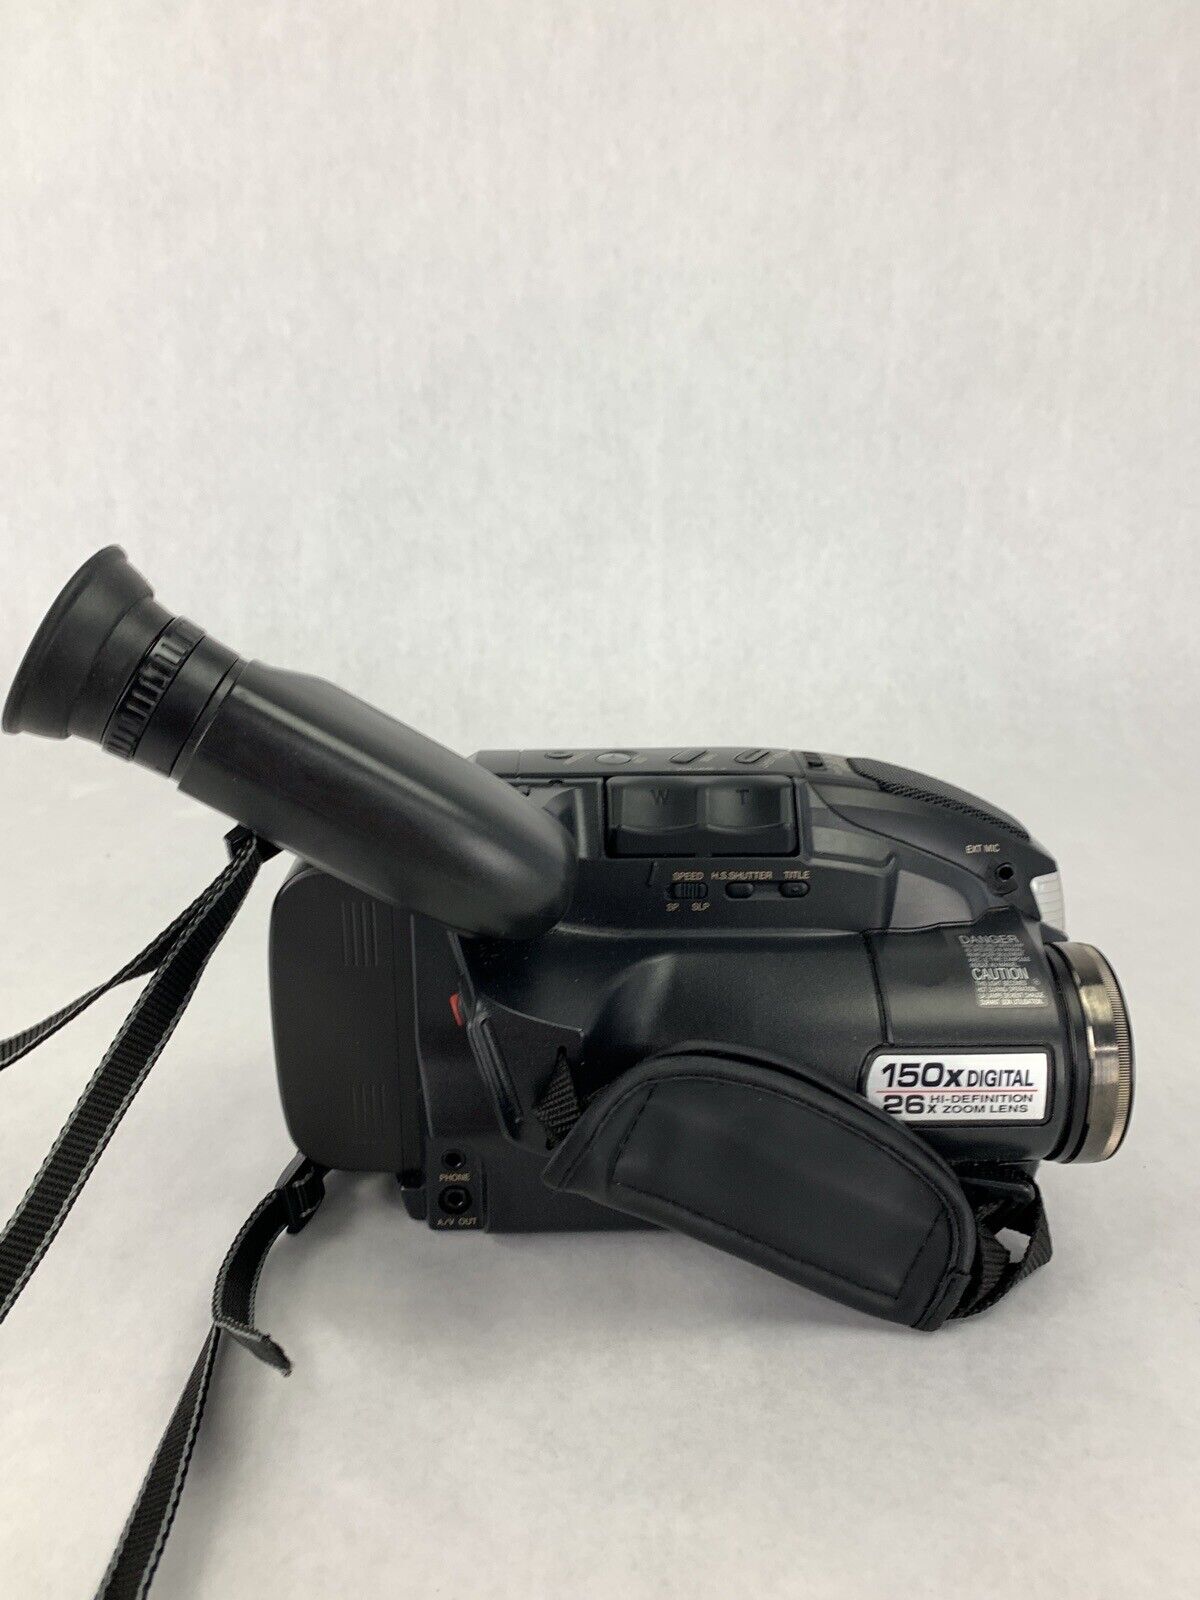 Panasonic PV-L659D Camcorder Untested